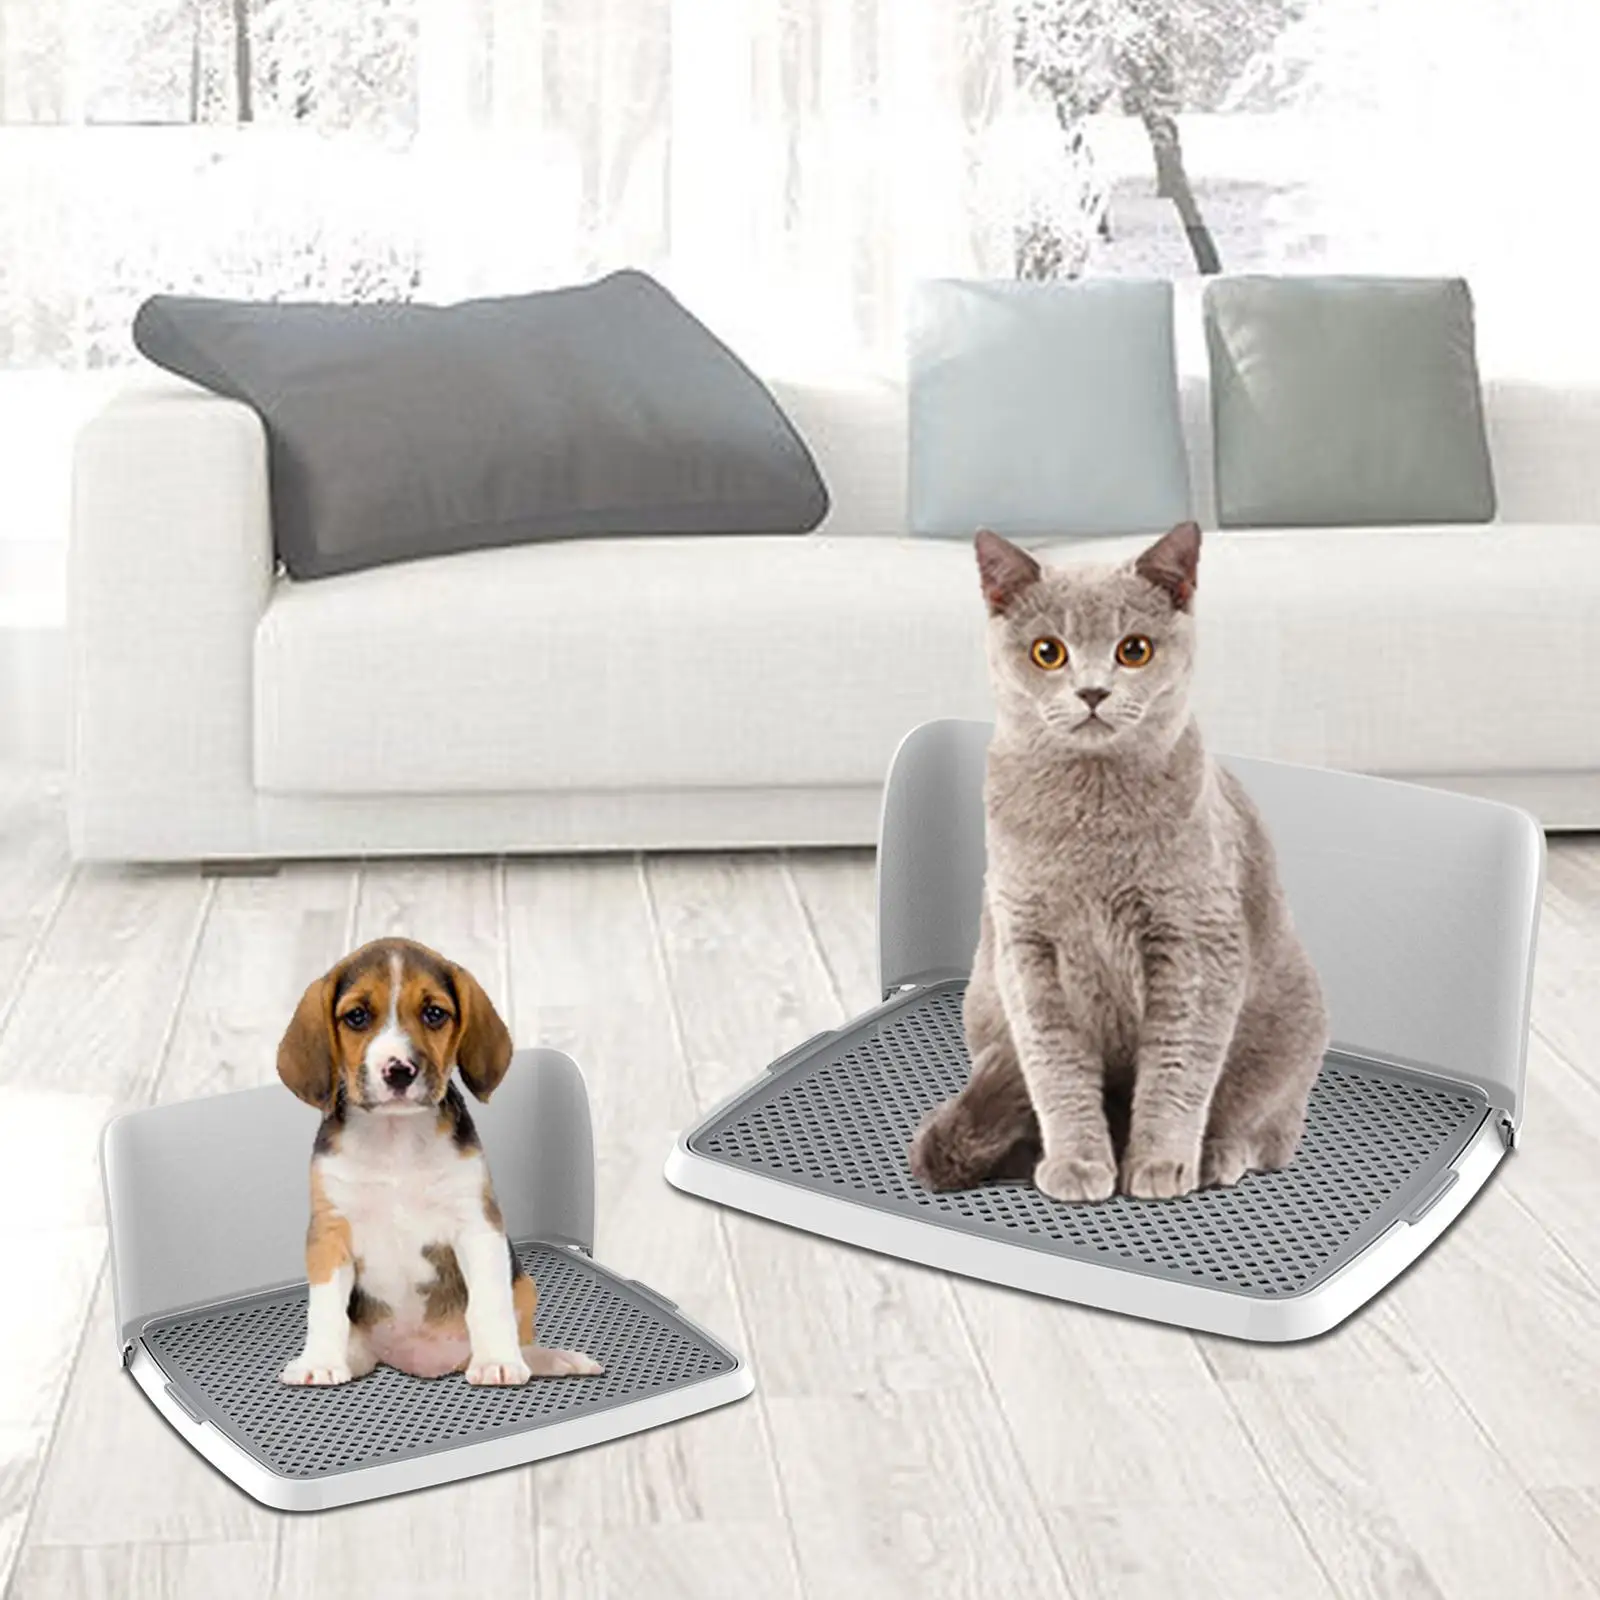 Portable Pet Dog Toilet Puppy Training Potty Tray Folding Litter Tray Removable Bedpan Pet Pee Toilet Pee Pad Holder for Porch